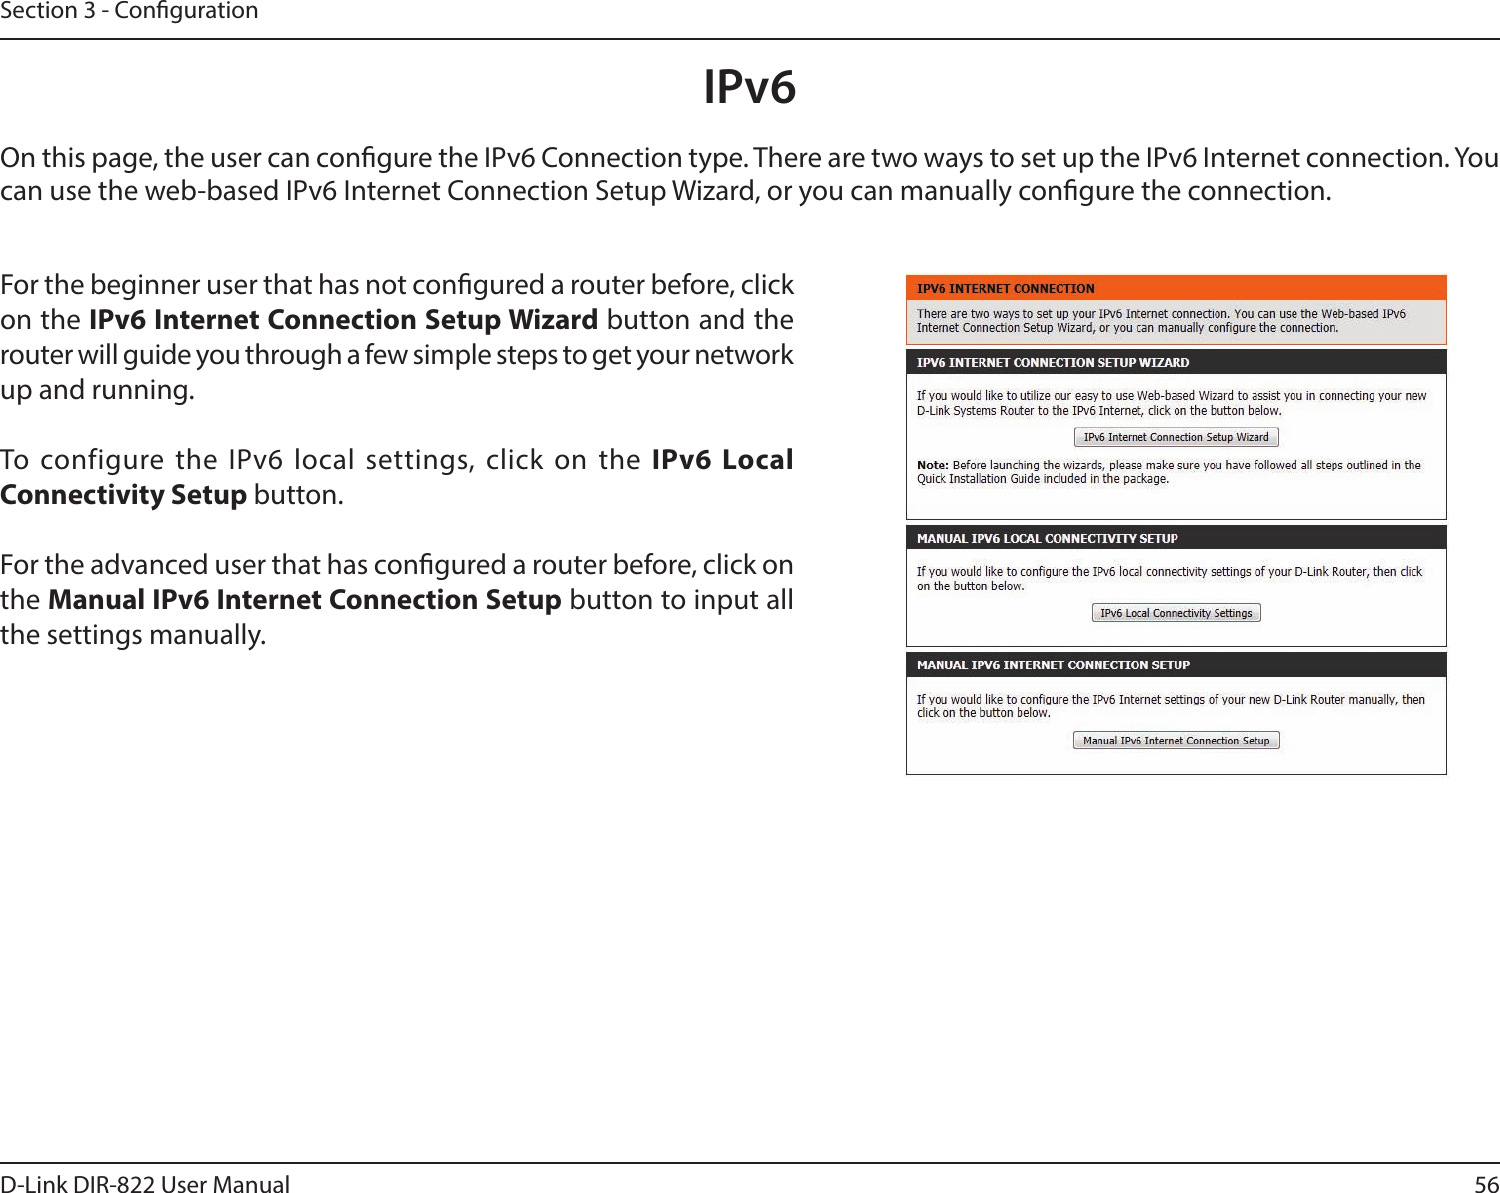 56D-Link DIR-822 User ManualSection 3 - CongurationIPv6On this page, the user can congure the IPv6 Connection type. There are two ways to set up the IPv6 Internet connection. You can use the web-based IPv6 Internet Connection Setup Wizard, or you can manually congure the connection.For the beginner user that has not congured a router before, click on the IPv6InternetConnectionSetupWizardbutton and the router will guide you through a few simple steps to get your network up and running.To configure the IPv6 local settings, click on the IPv6 Local Connectivity Setup button.For the advanced user that has congured a router before, click on the Manual IPv6 Internet Connection Setup button to input all the settings manually.